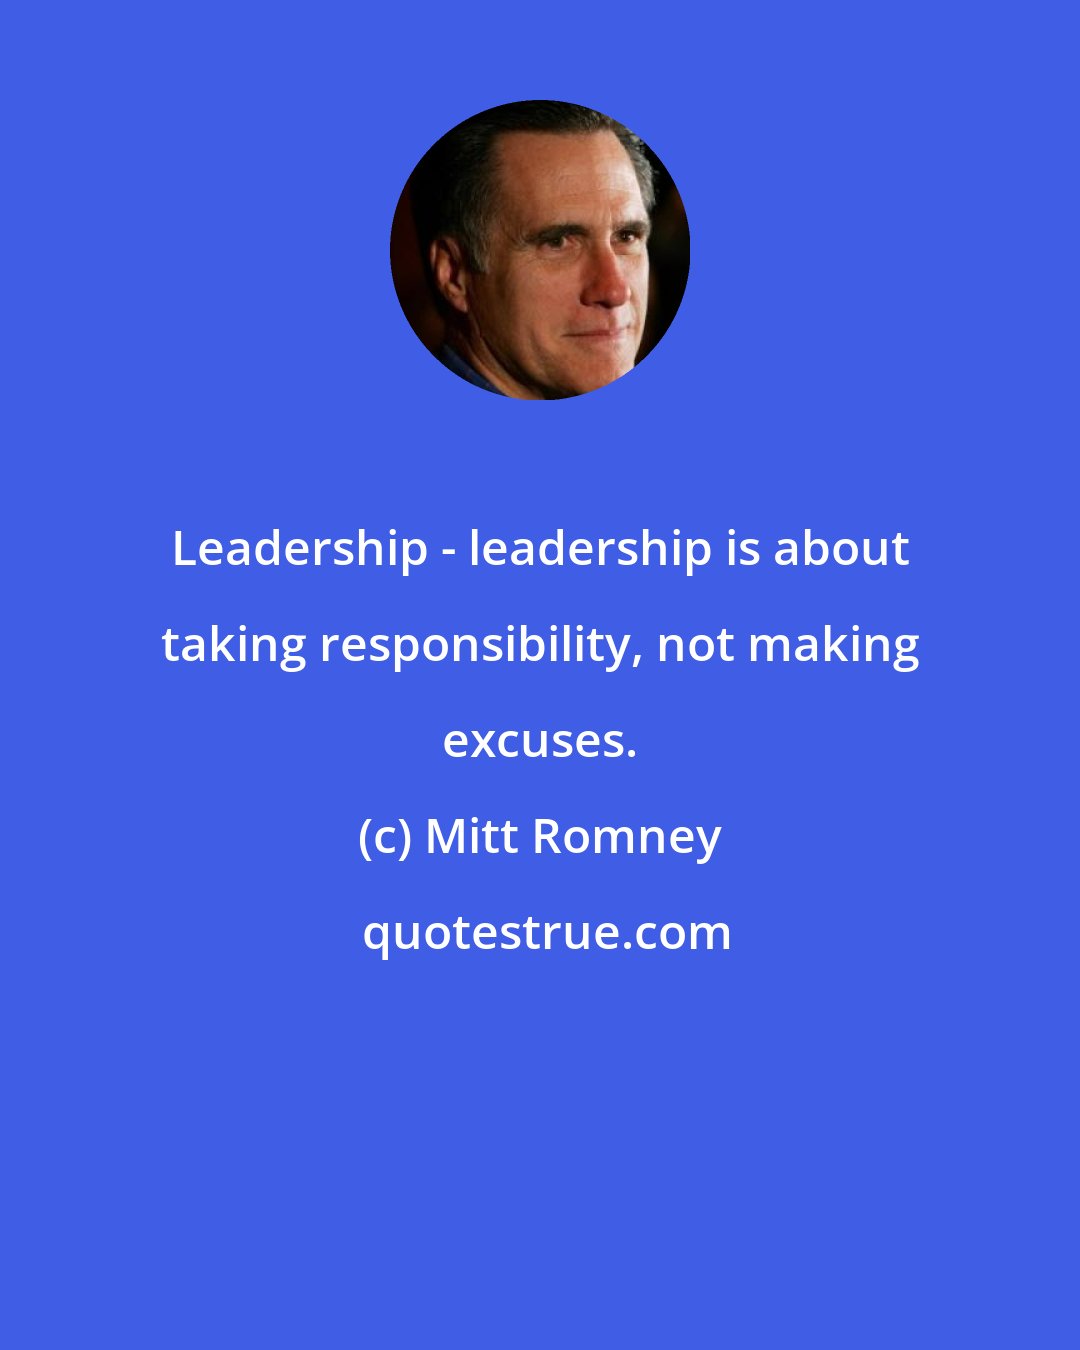 Mitt Romney: Leadership - leadership is about taking responsibility, not making excuses.